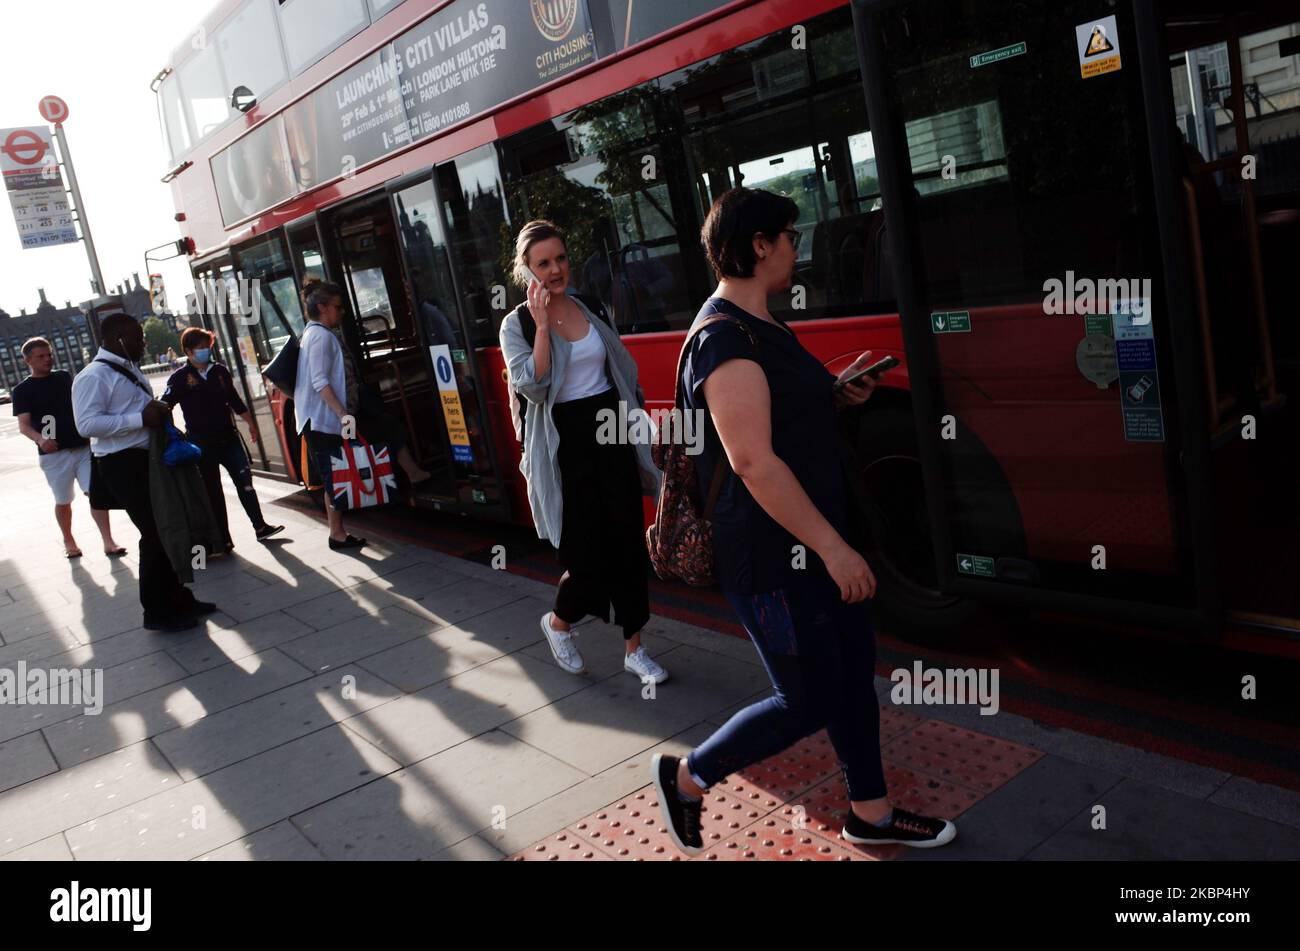 People board a bus on Westminster Bridge Road in London, England, on May 21, 2020. Coronavirus cases are believed to be dropping to very low levels across the capital, with none at all recorded this Monday, according to data from Public Health England, and media reporting yesterday that six major London hospitals had recorded no covid-19 deaths for the previous 48 hours. UK-wide deaths meanwhile stand at 36,042 according to the daily total released this afternoon by the Department of Health and Social Care. (Photo by David Cliff/NurPhoto) Stock Photo